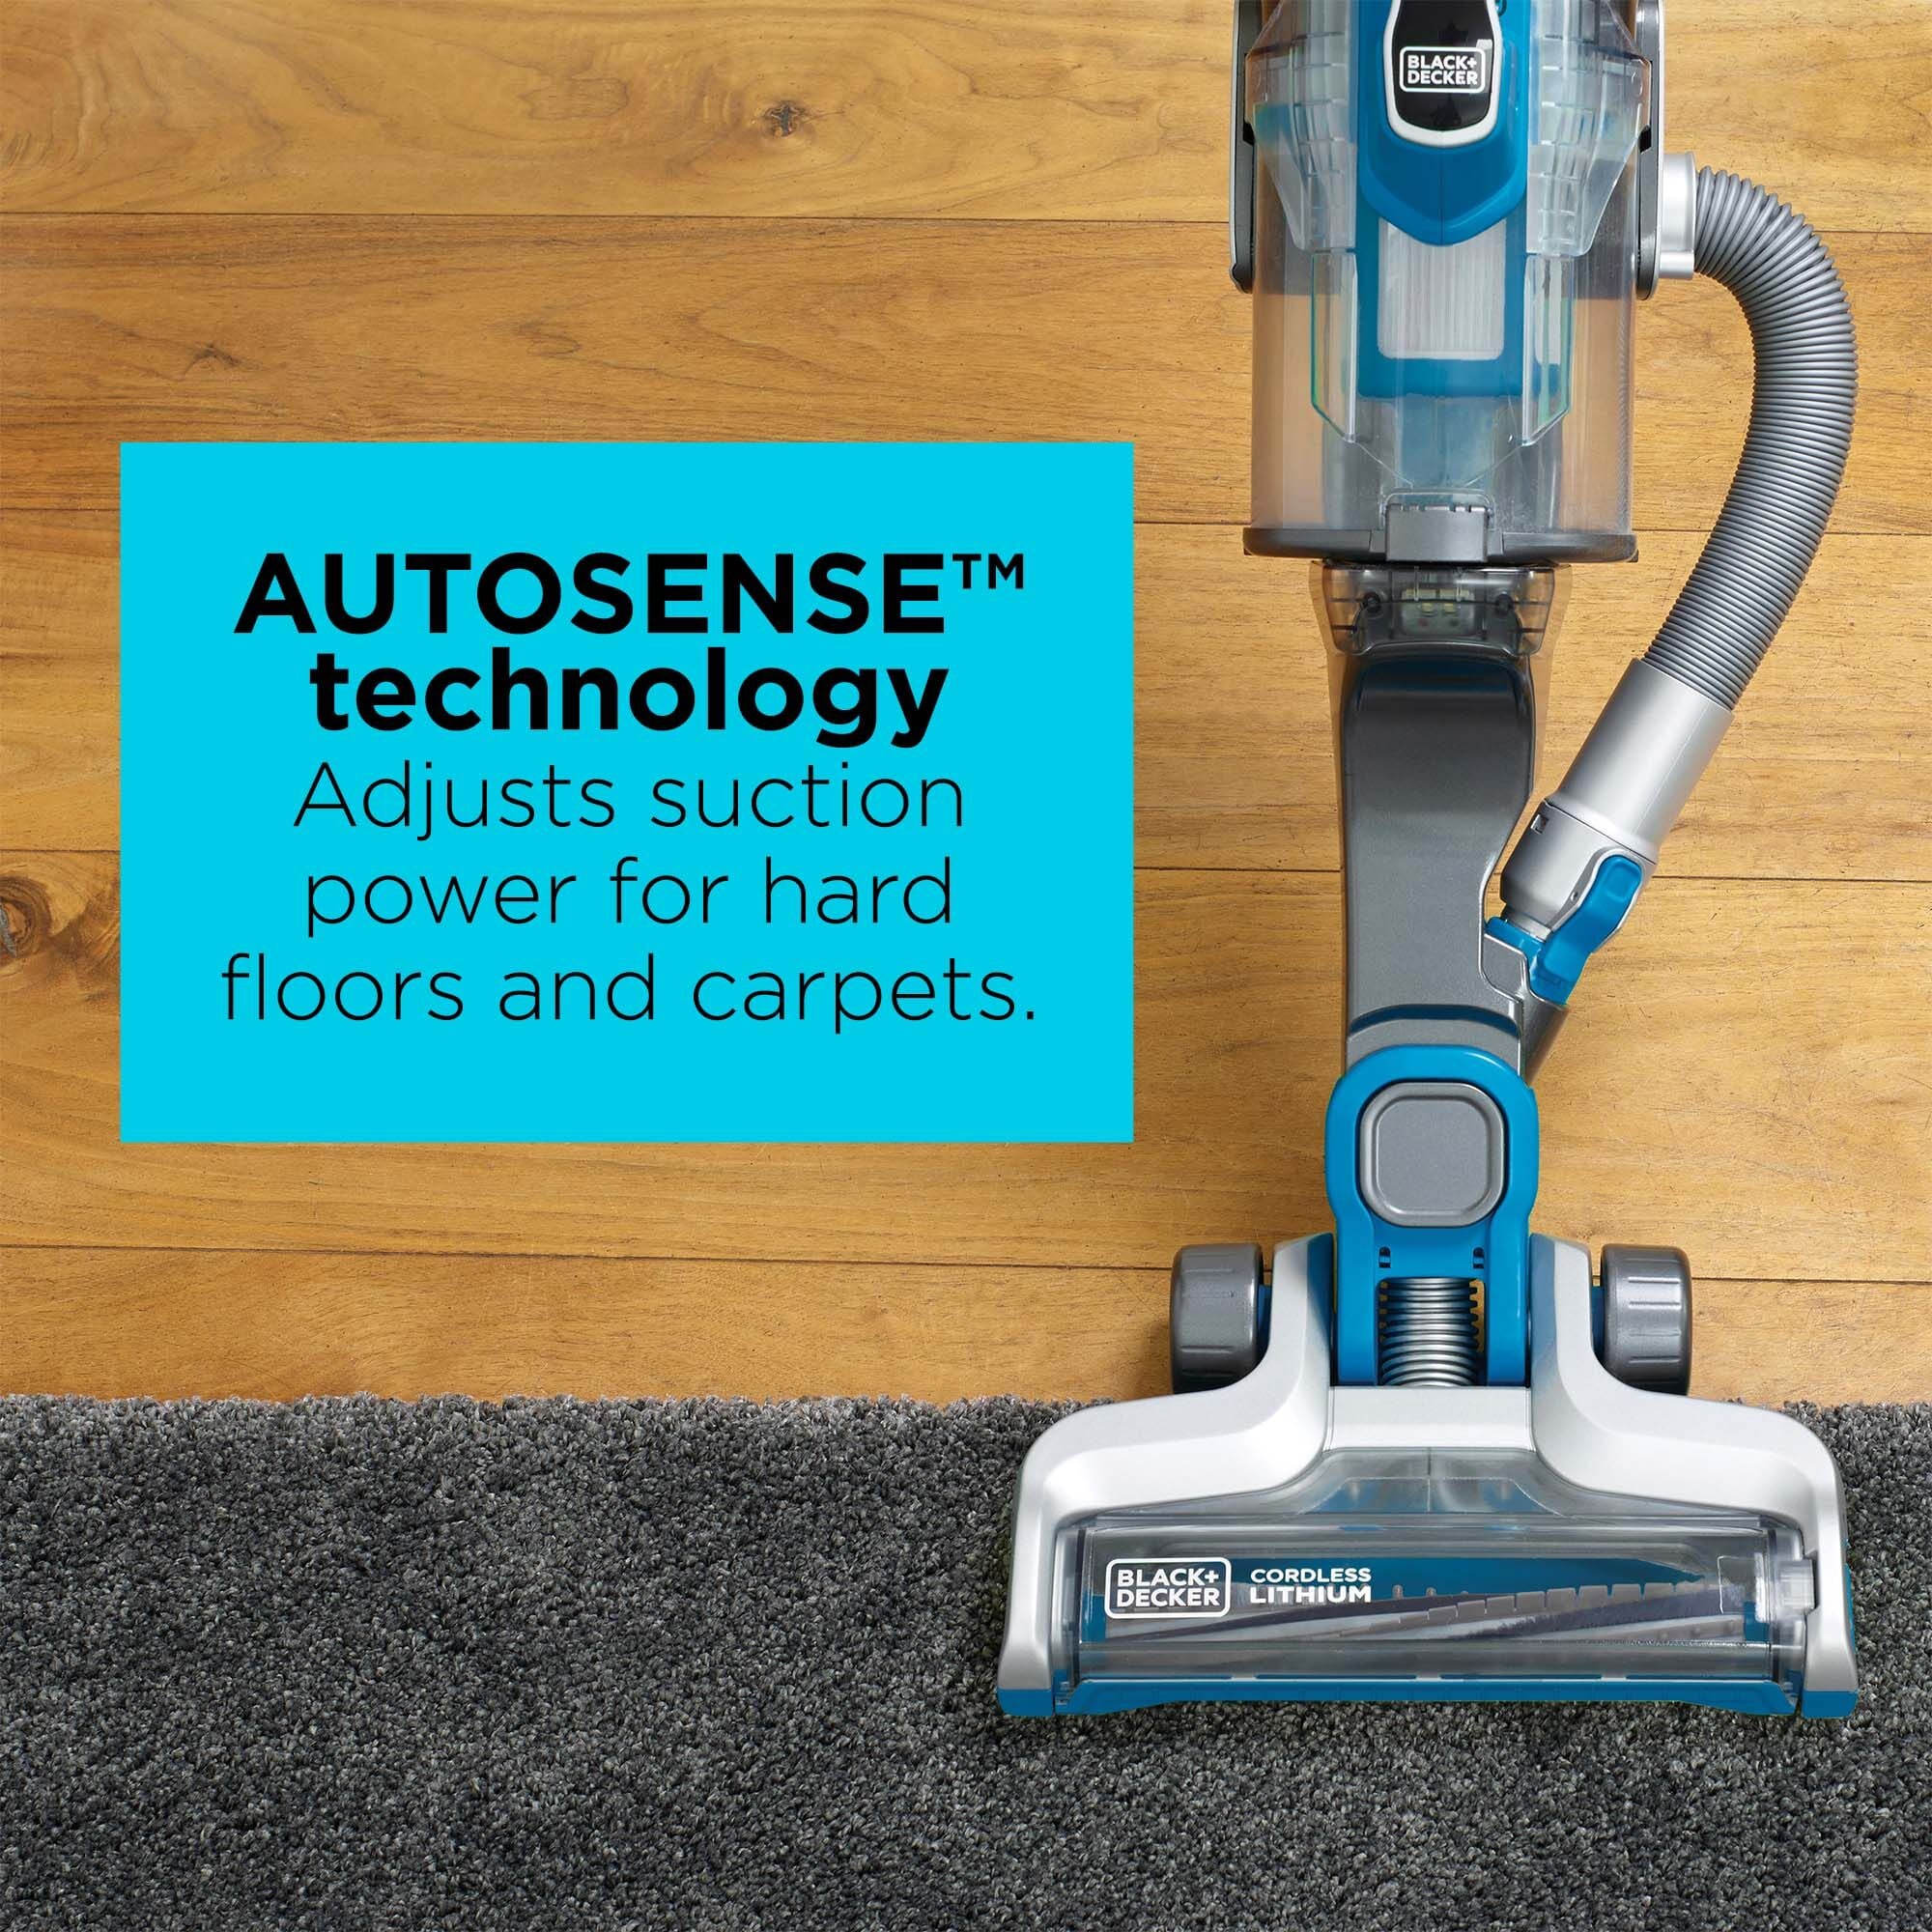 The Black+Decker Powerseries Cordless Vacuum Is on Sale Right Now